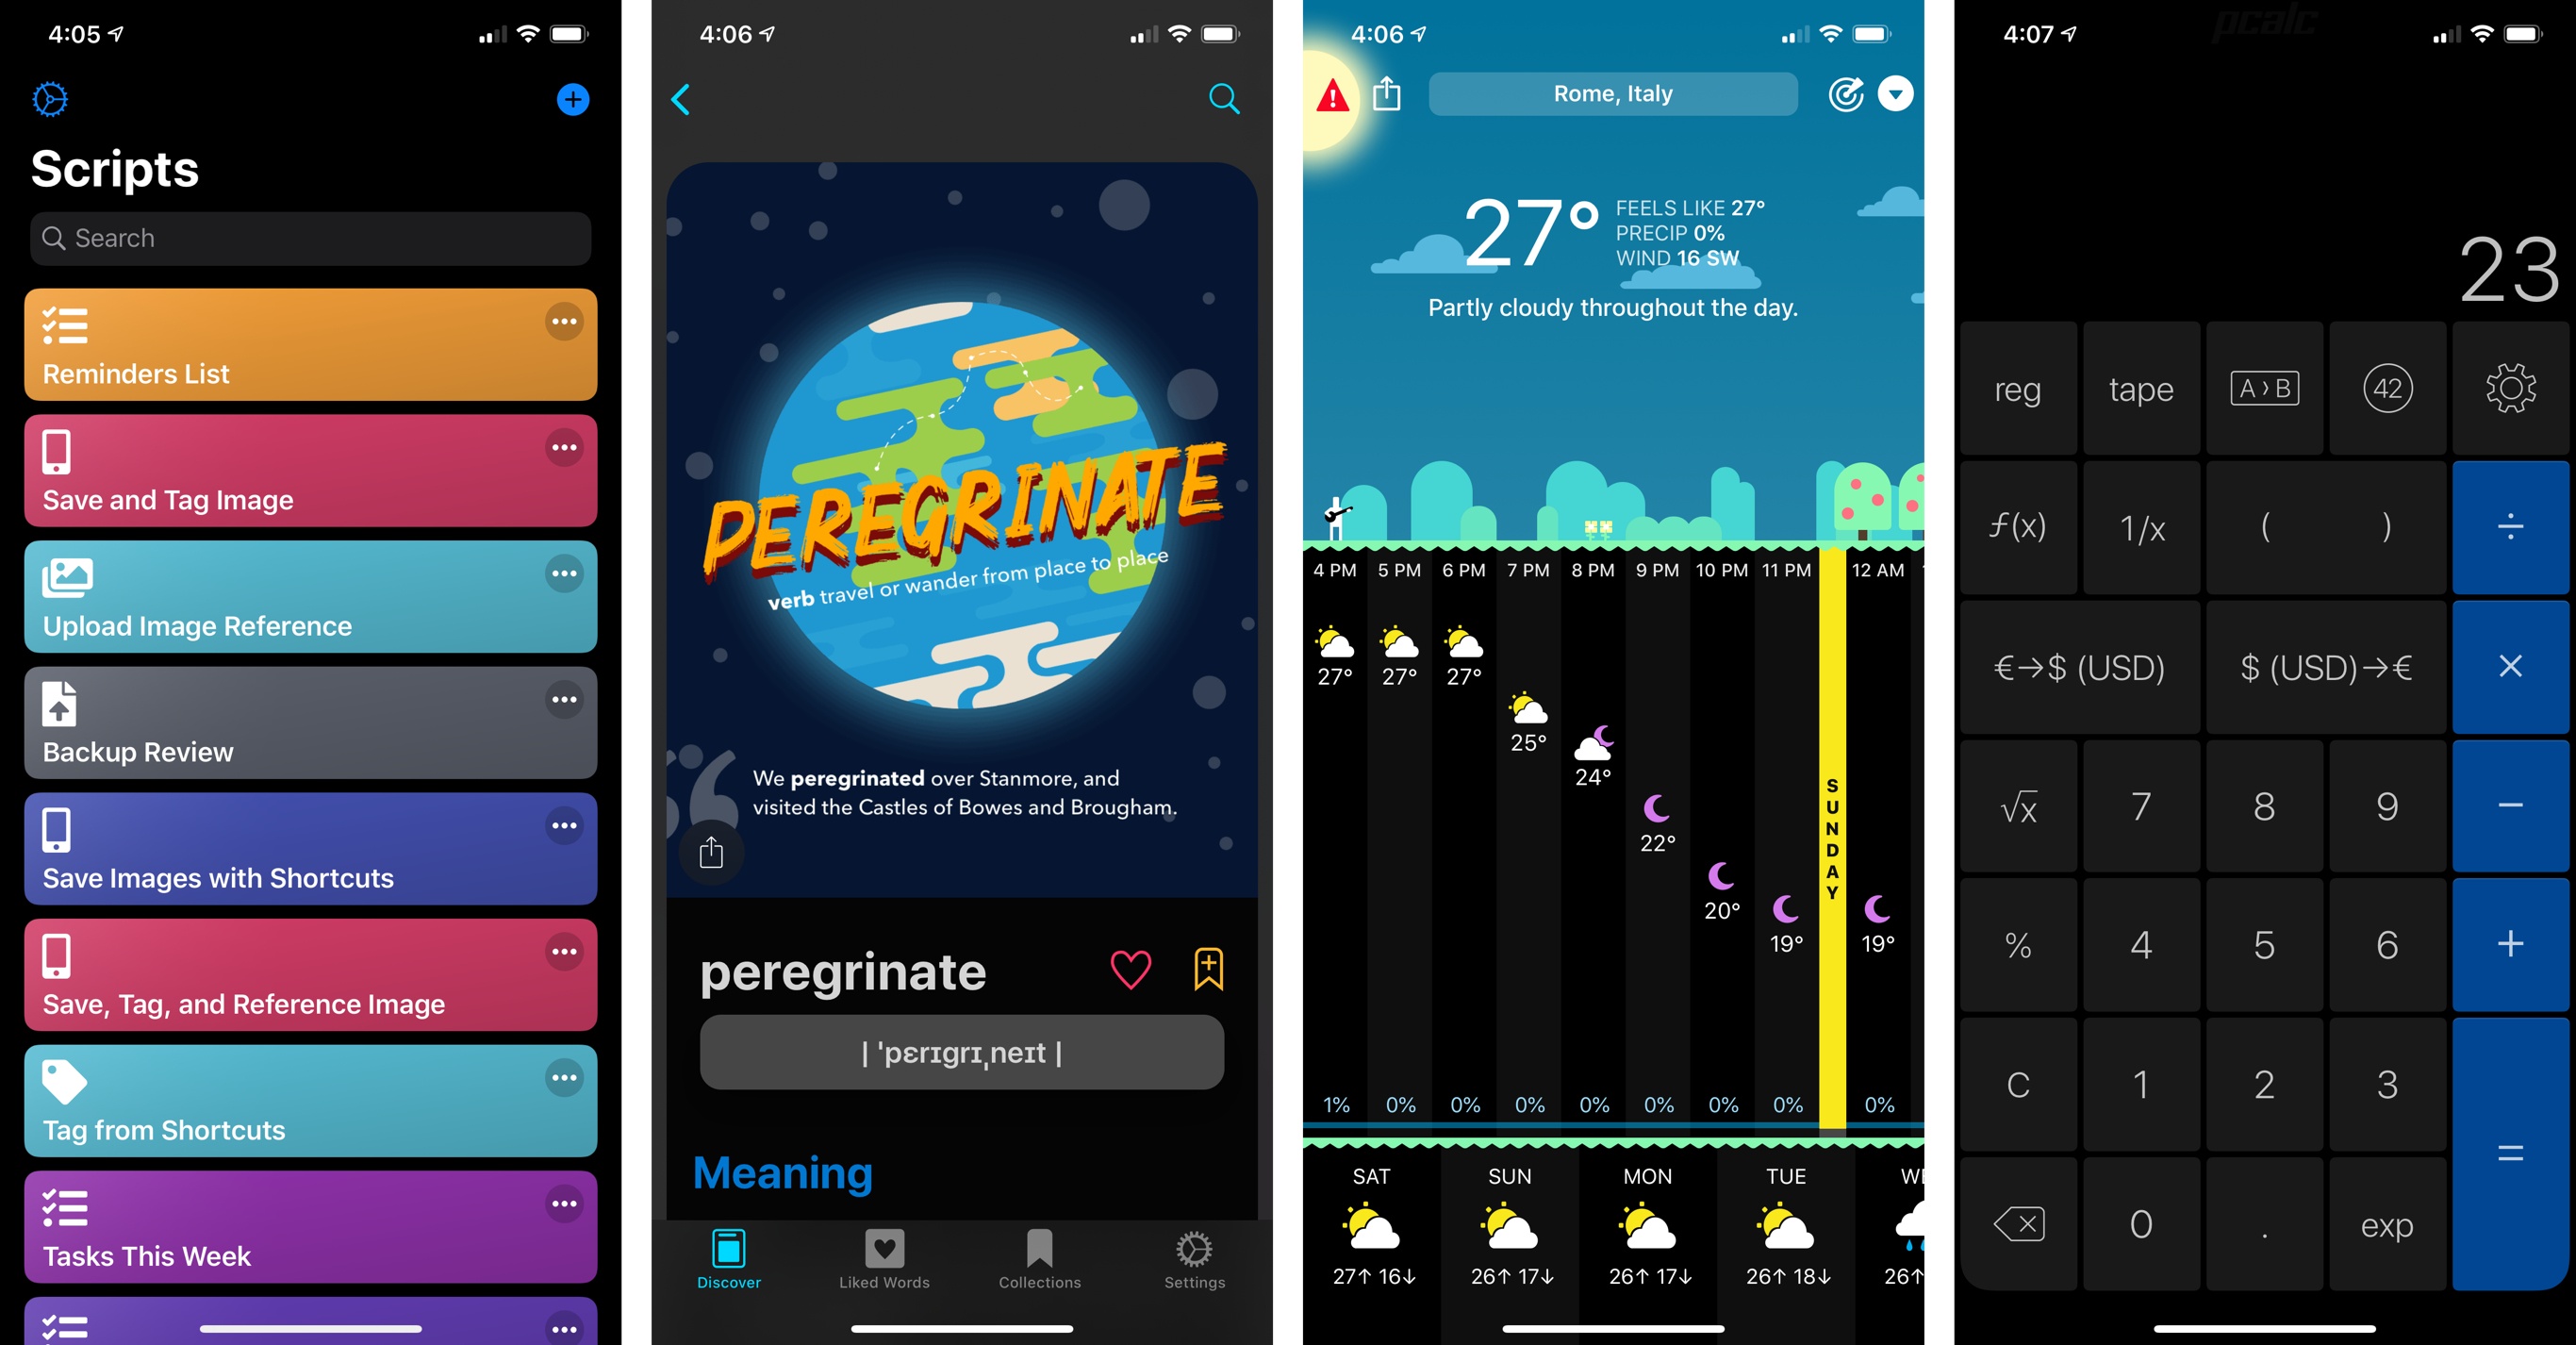 From left to right: Scriptable, LookUp, CARROT Weather, and PCalc running on iOS 13 with support for native dark mode.